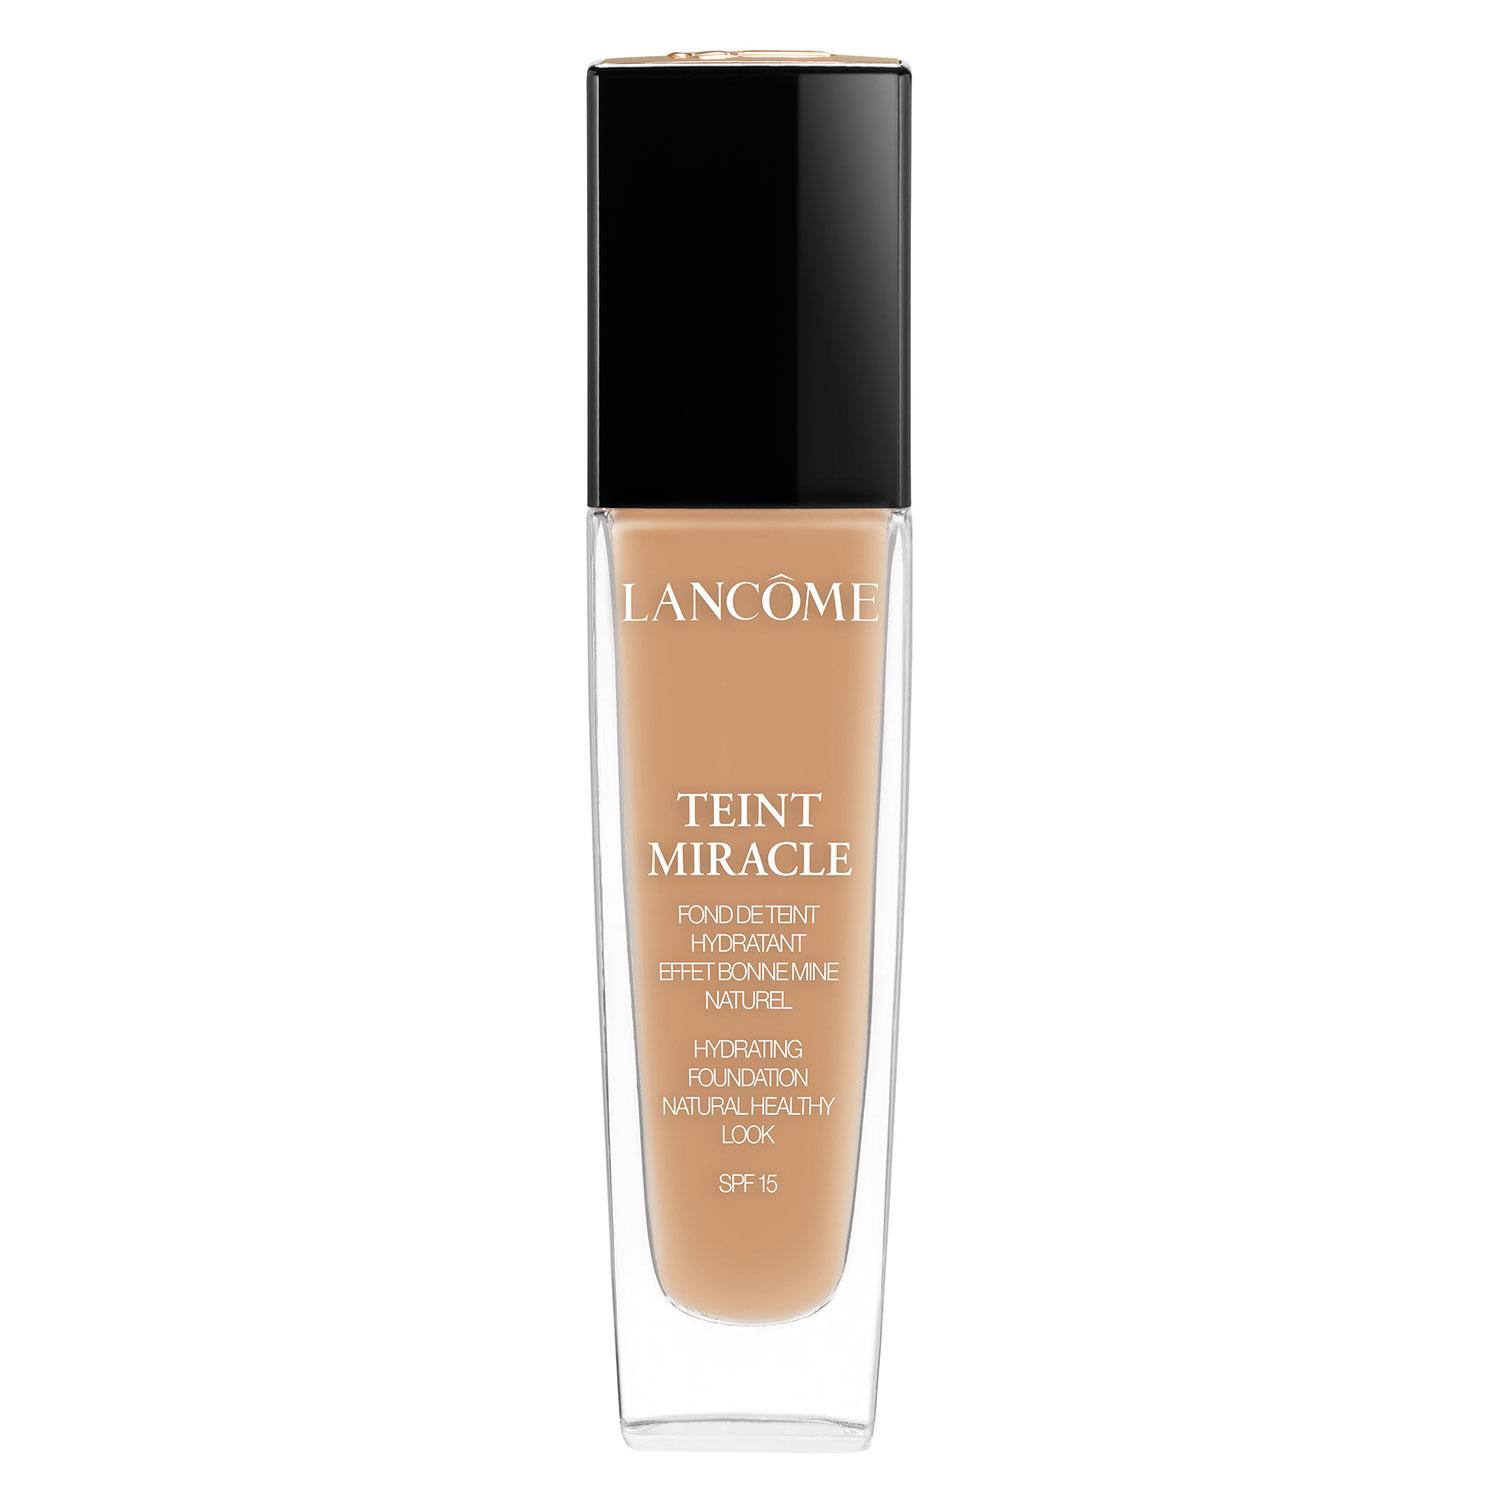 Teint Miracle - Fluide Beige Cannelle 06